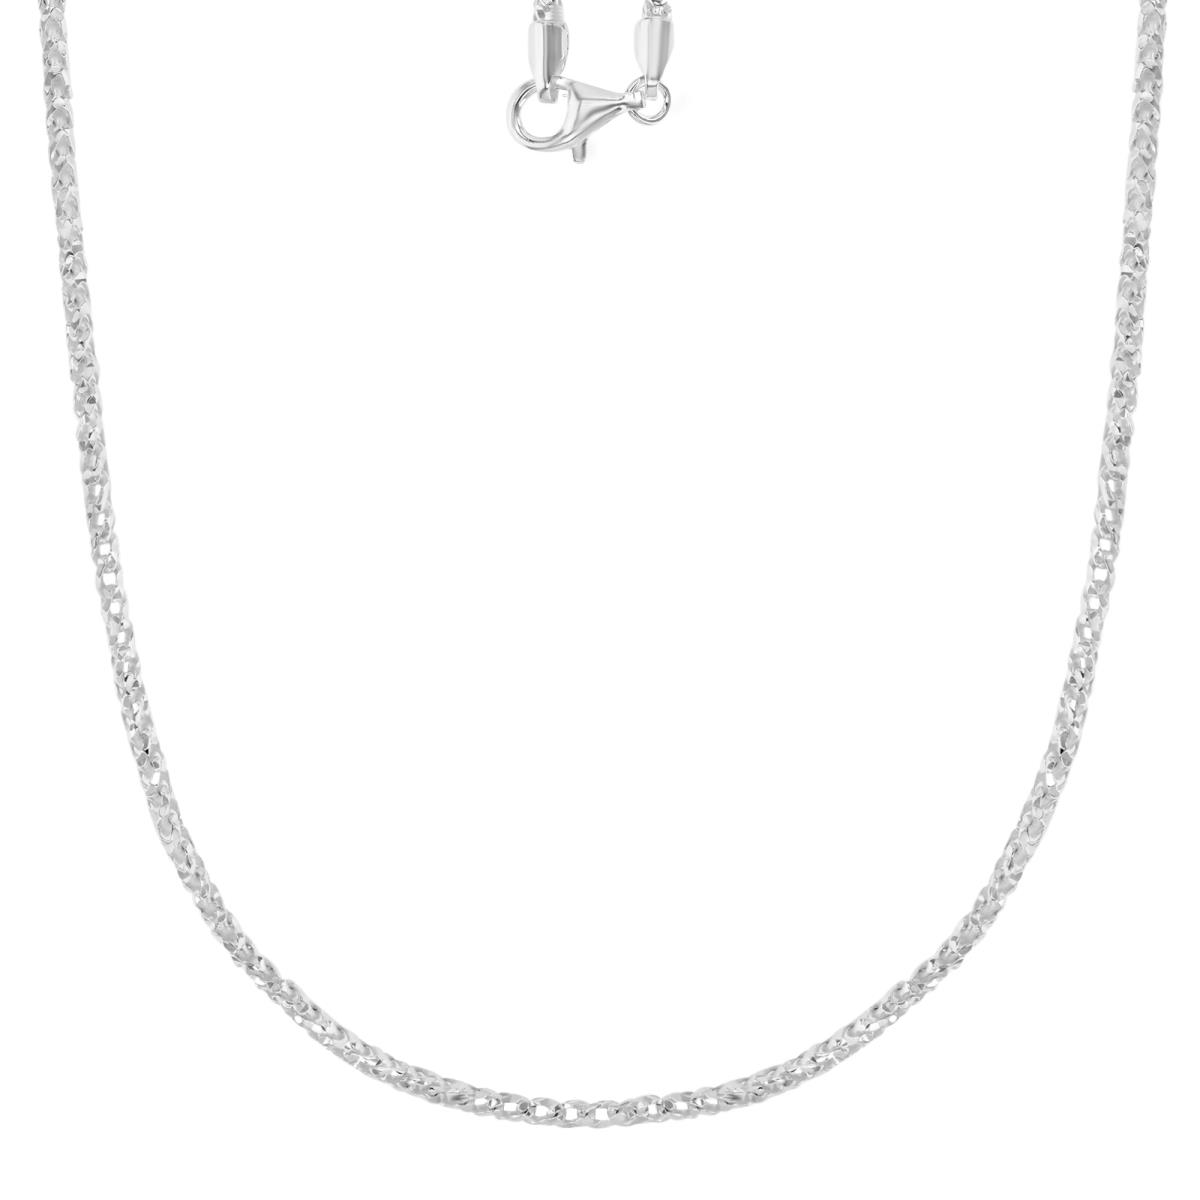 Sterling Silver Anti-Tarnish 2.4MM Polished & Diamond Cut 080 Franco 20" Chain Necklace